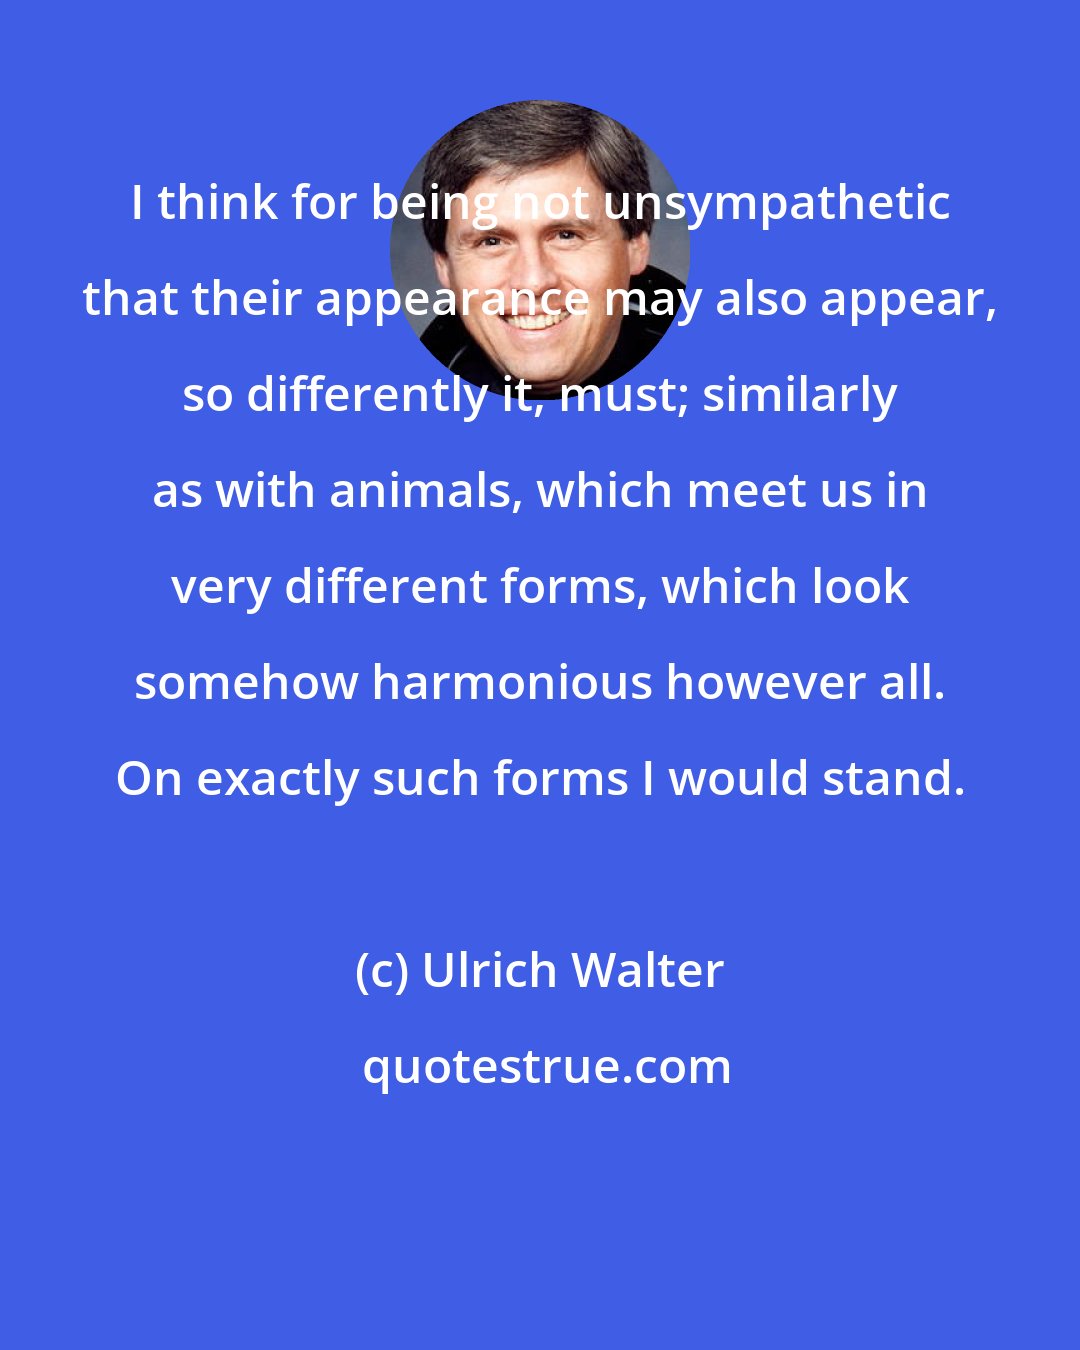 Ulrich Walter: I think for being not unsympathetic that their appearance may also appear, so differently it, must; similarly as with animals, which meet us in very different forms, which look somehow harmonious however all. On exactly such forms I would stand.